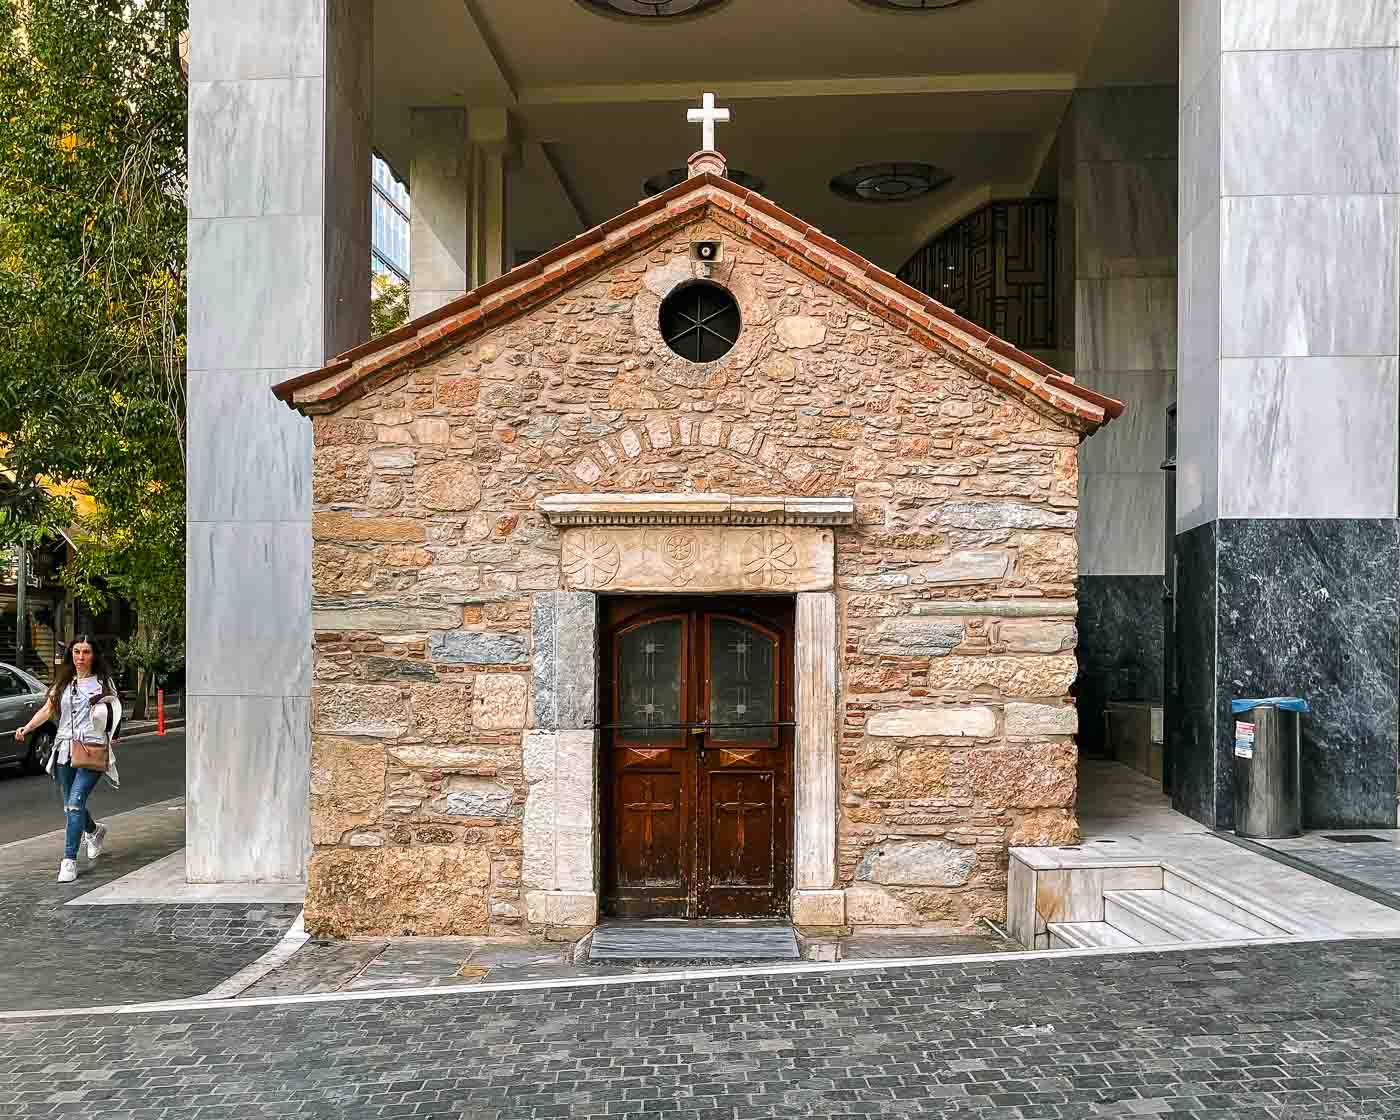 The Agia Dynamis Church is a small 16th-century hidden gem tucked away amidst modern buildings. I passed by it once, and it felt like a surreal movie set since the entire church is surrounded by a contemporary building, as you can see in the pictures here. 